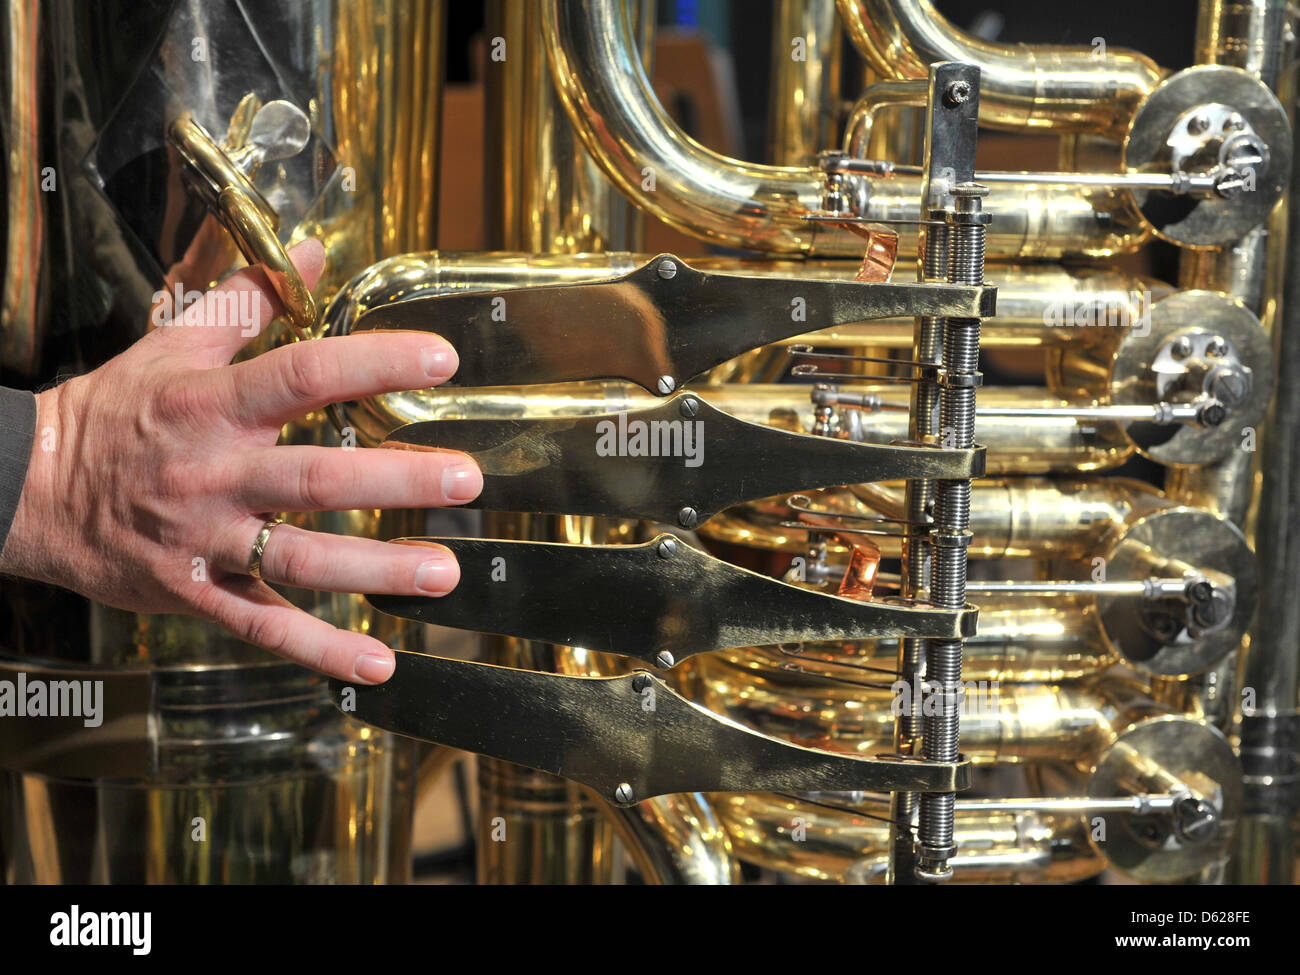 Joerg Wachsmuth from Dresden plays 'Flight of the Bumblebee' on the world's biggest playable tuba with the symphony orchestra of Markneukirchen inMarkneukirchen, Germany, 15 May 2012. The tuba is 2 meters high, weighs arounf 50 kg and has a bell with a 1 m diameter, making it roughly twice as big as an ordinary sized tuba. Photo: HENDRIK SCHMIDT Stock Photo